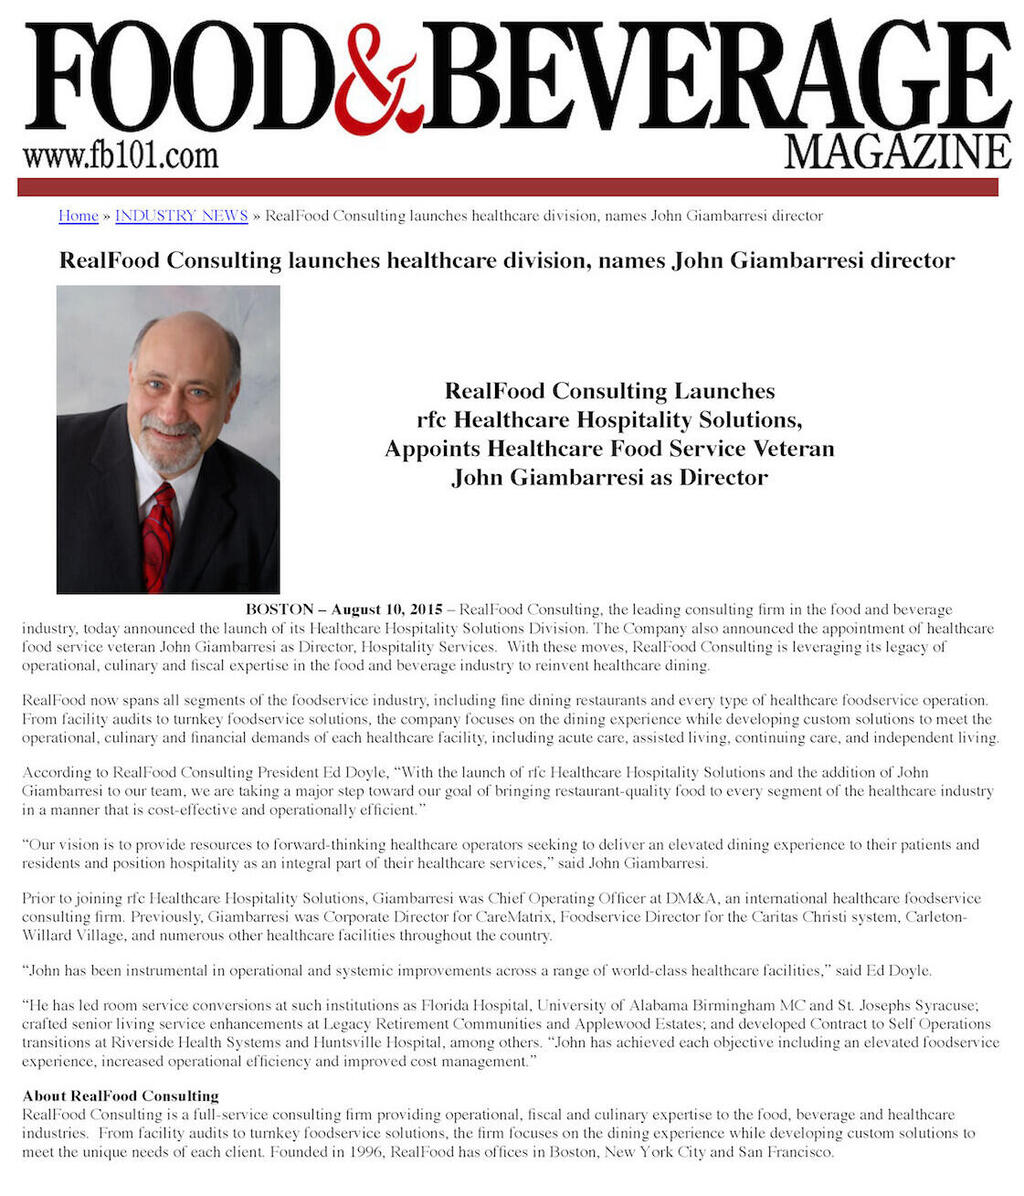 RealFood Consulting Announces Launch of Healthcare Hospitality Solutions and Appoints John Giambarresi Director